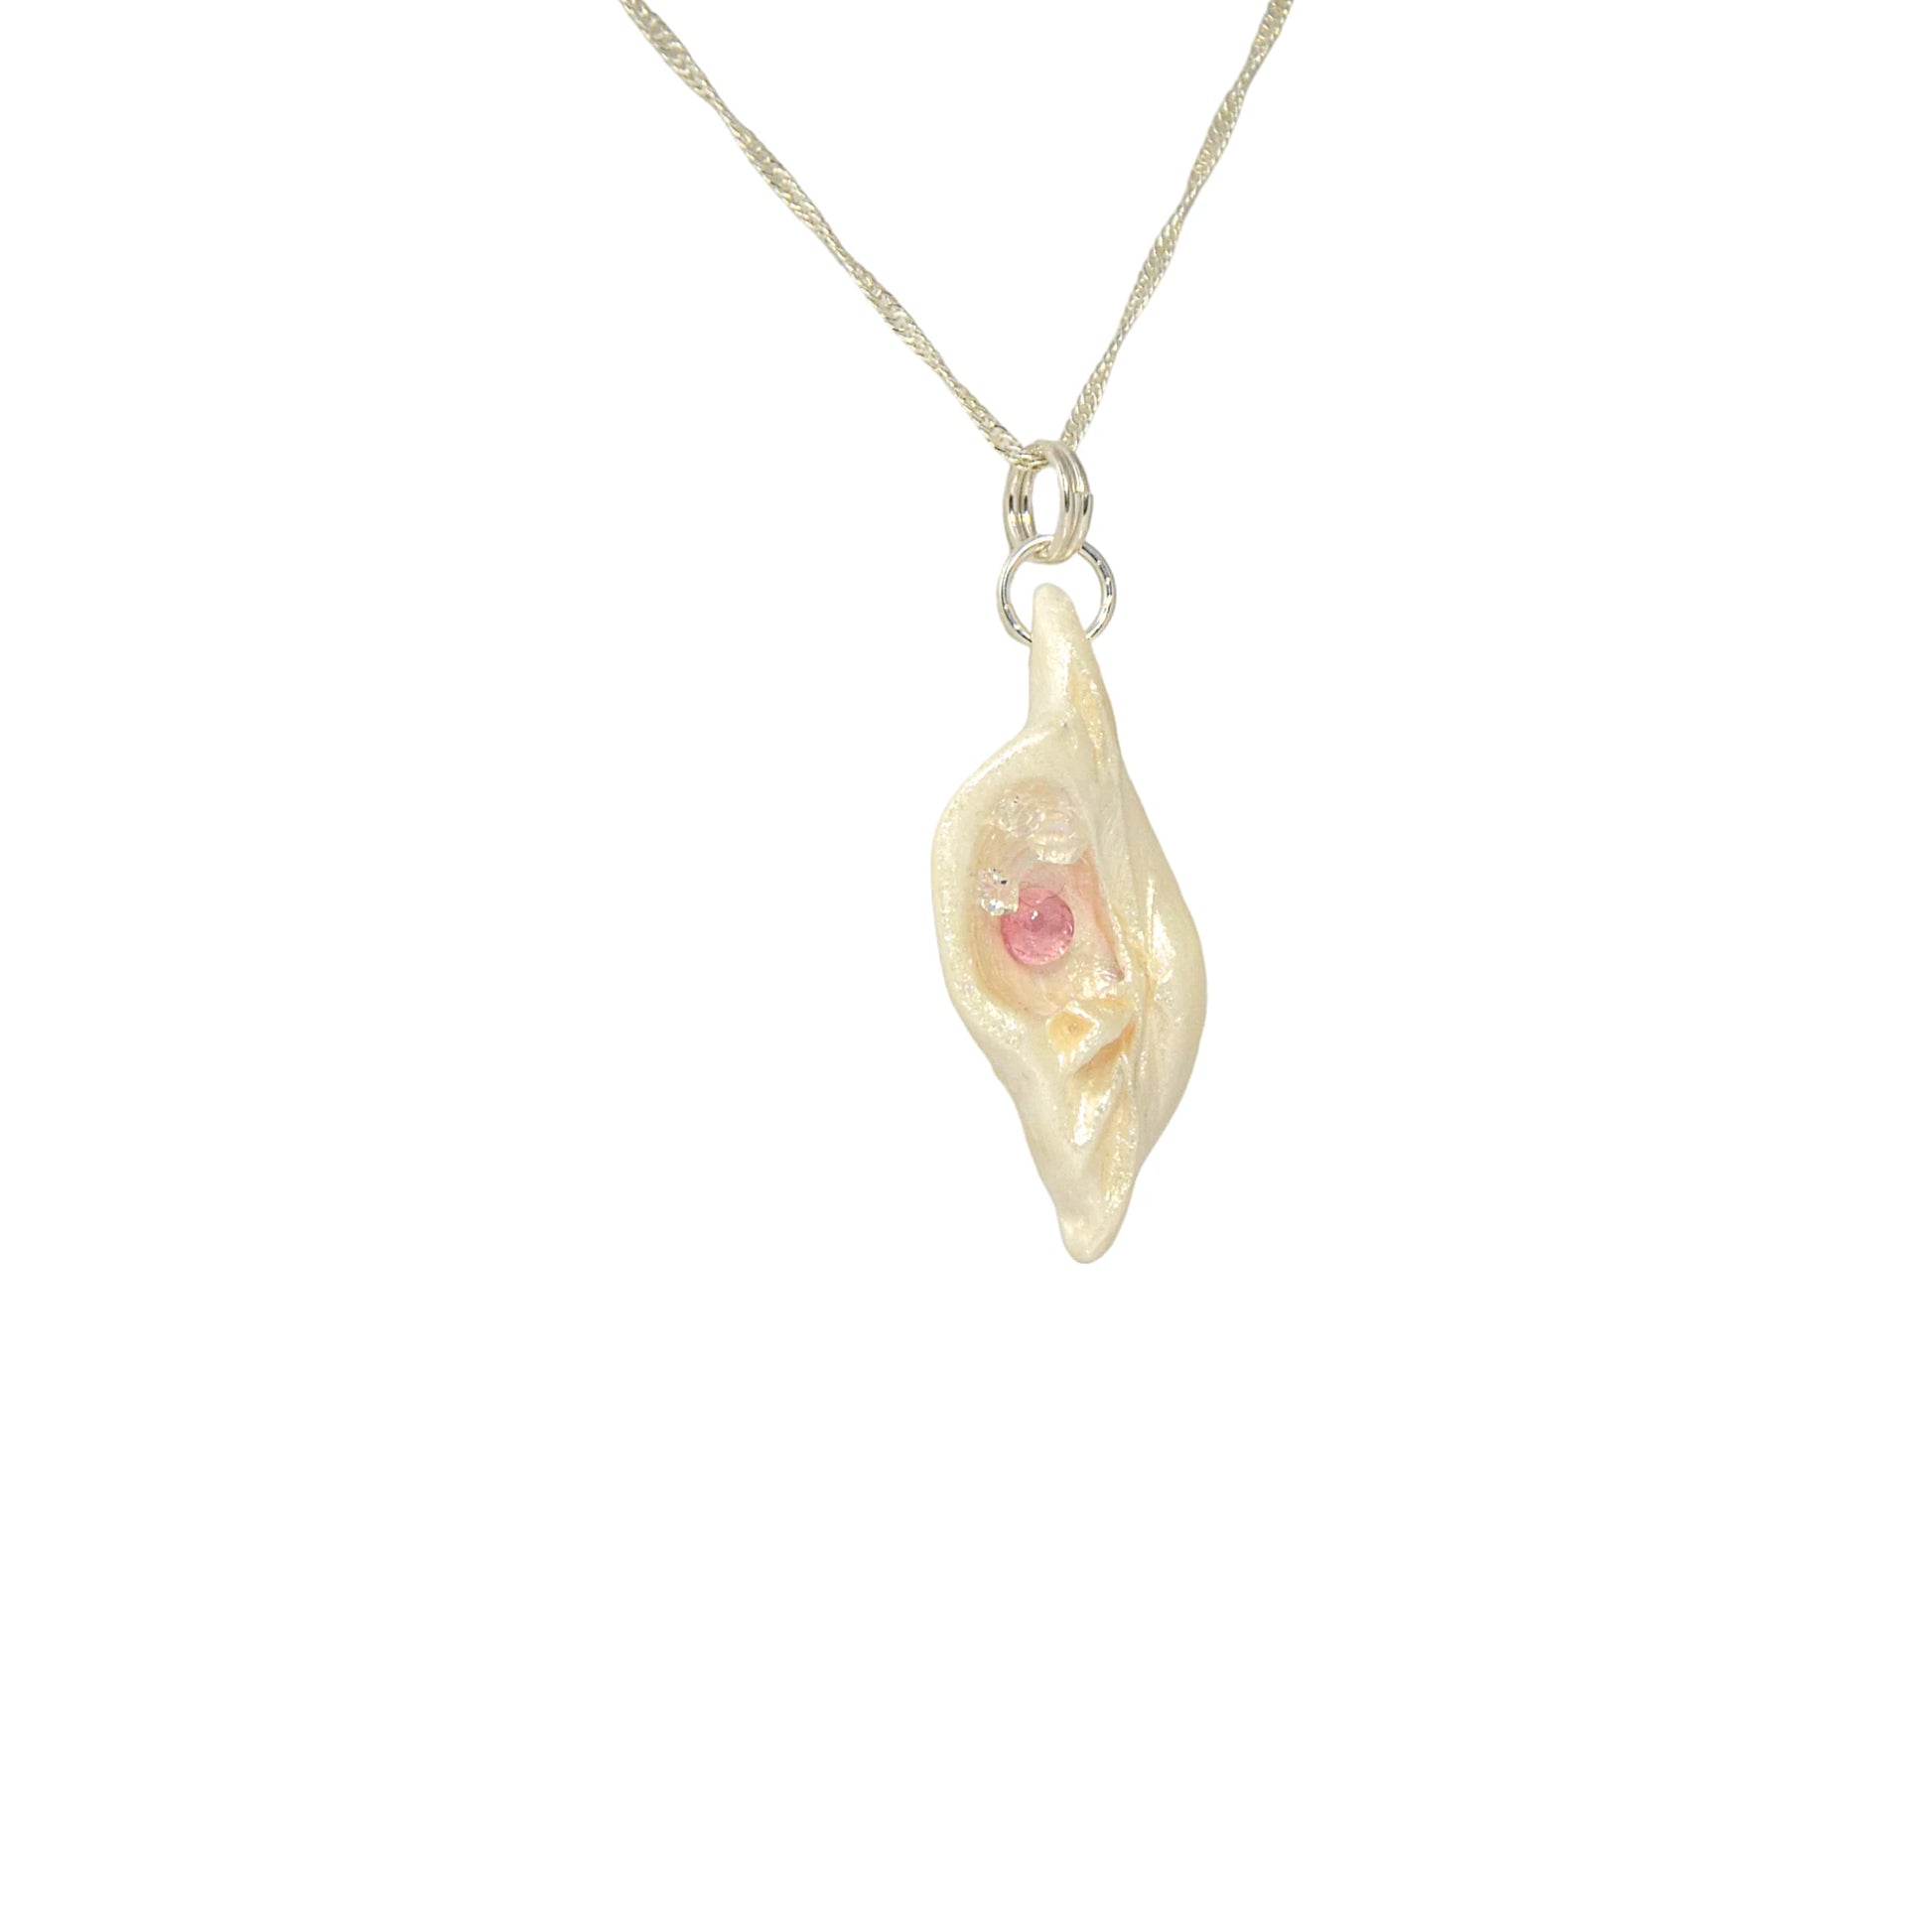 This natural seashell pendant has Pink Tourmaline gemstone and three Herkimer Diamonds that compliments the pendant. The pendant is shown turned so the viewer can see the right side of the pendant.